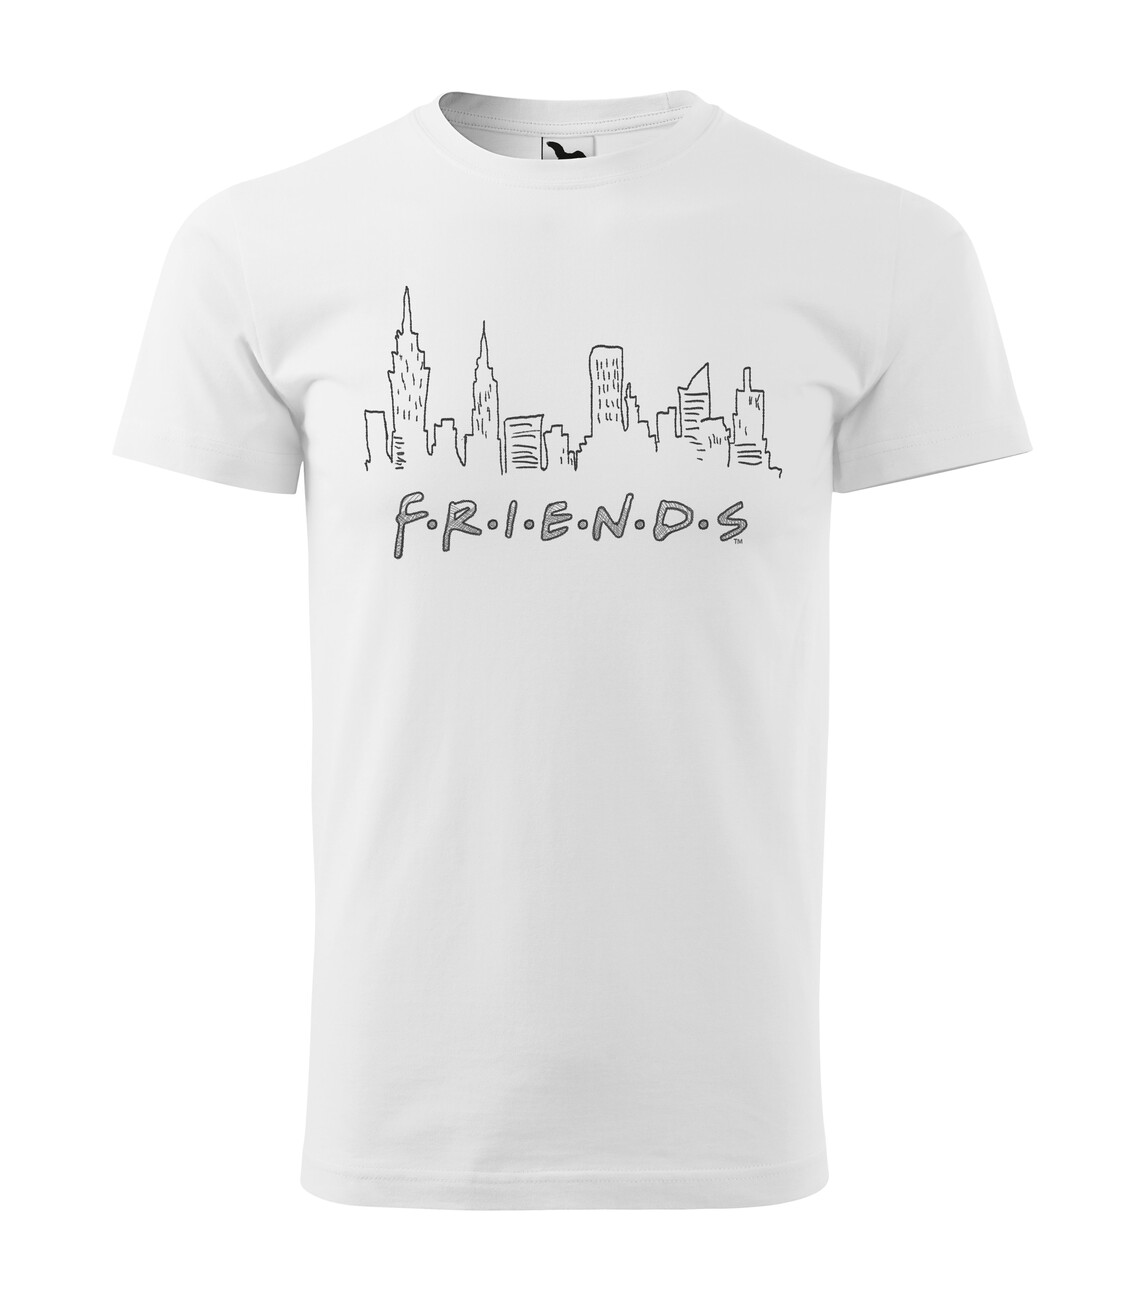 and | fans Clothes Logo merchandise for accessories Friends -